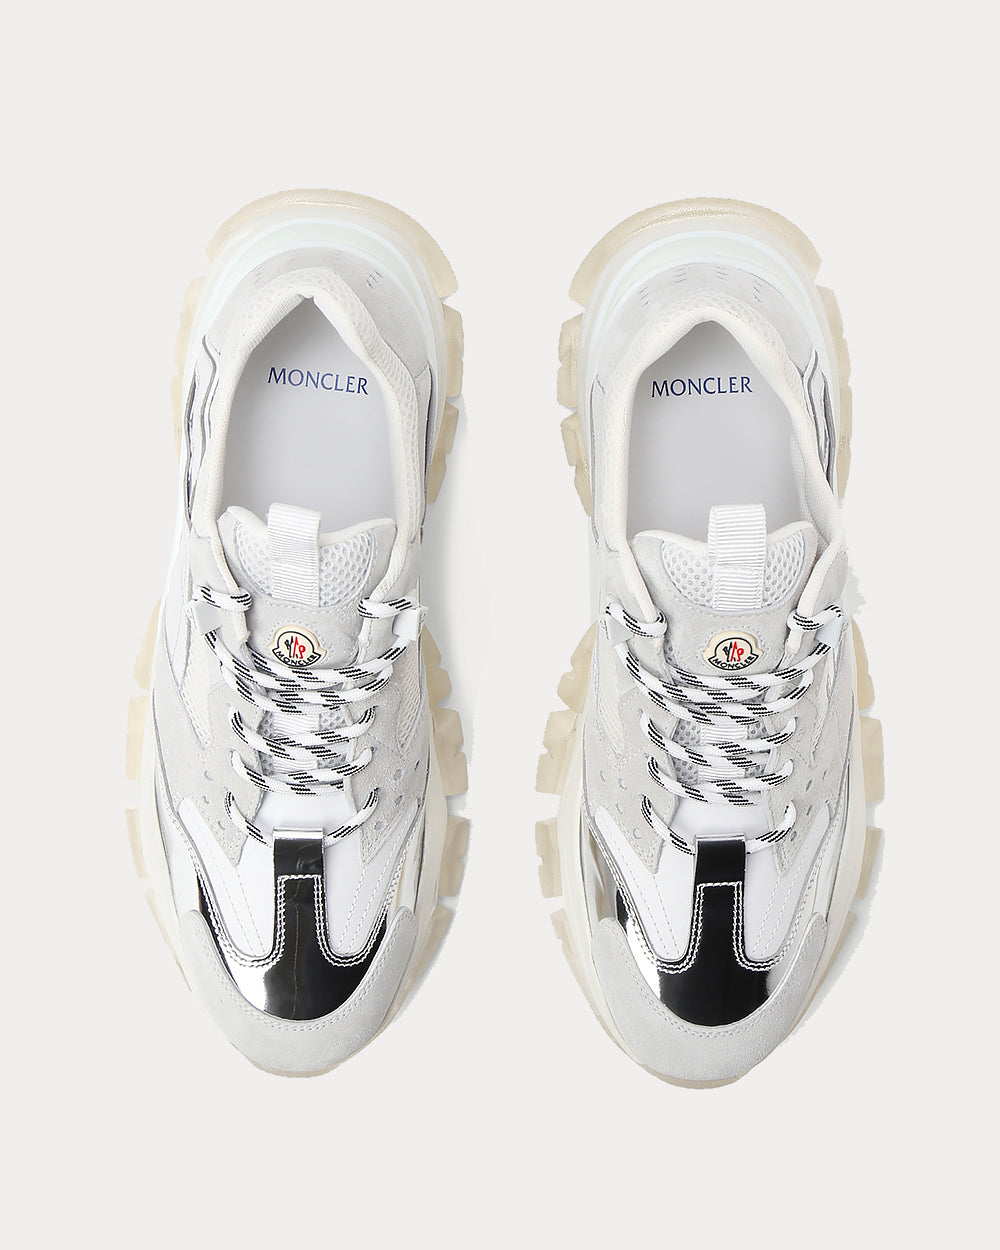 Moncler Leave No Trace White Low Top Sneakers - Sneak in Peace